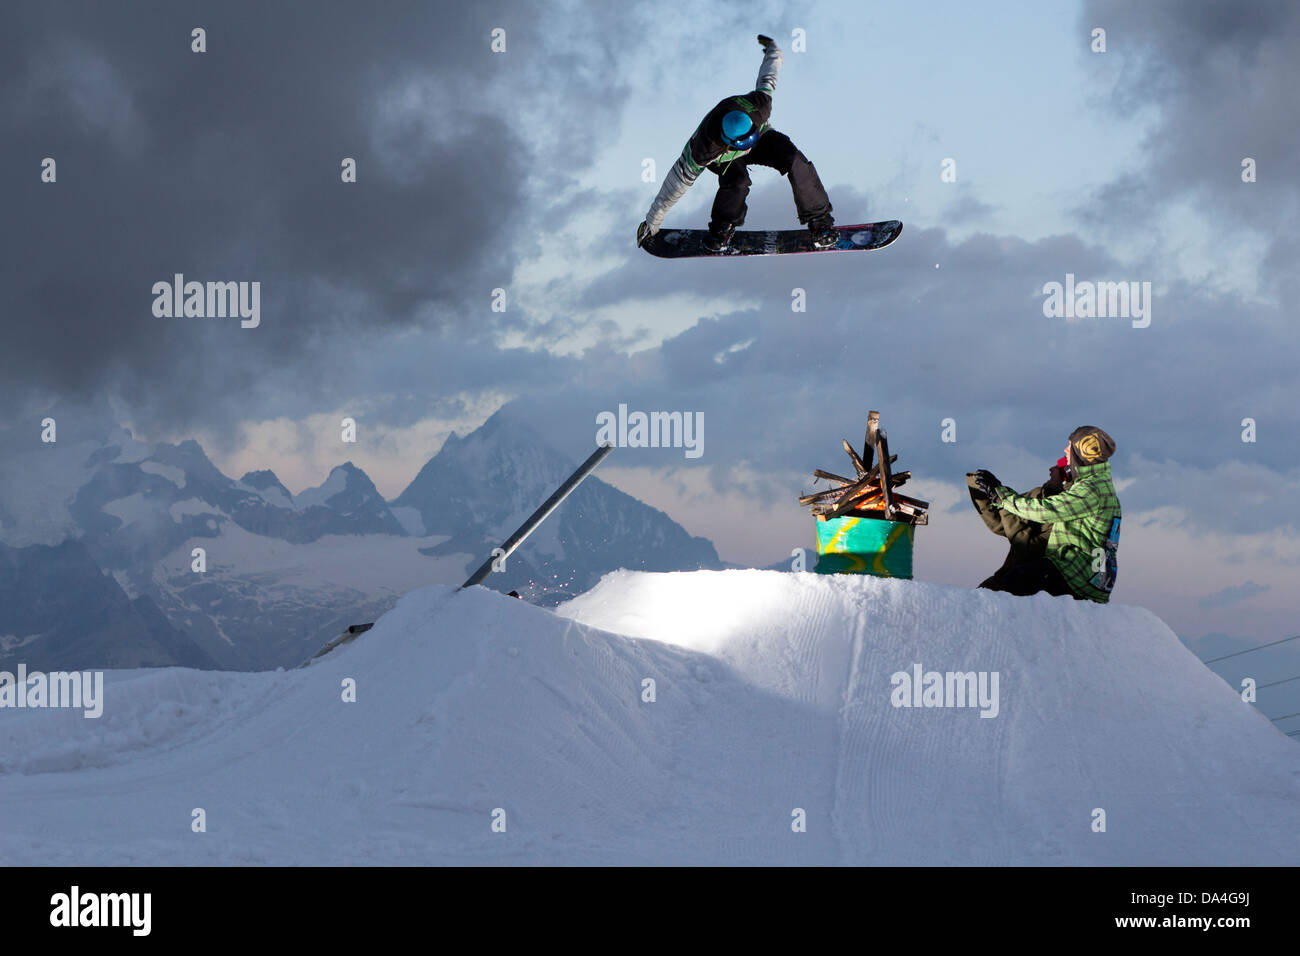 ZERMATT, SWITZERLAND. A freestyle snowboarder is executing a tailgrab trick and jumps over an oil barrel with a fire on it. Stock Photo